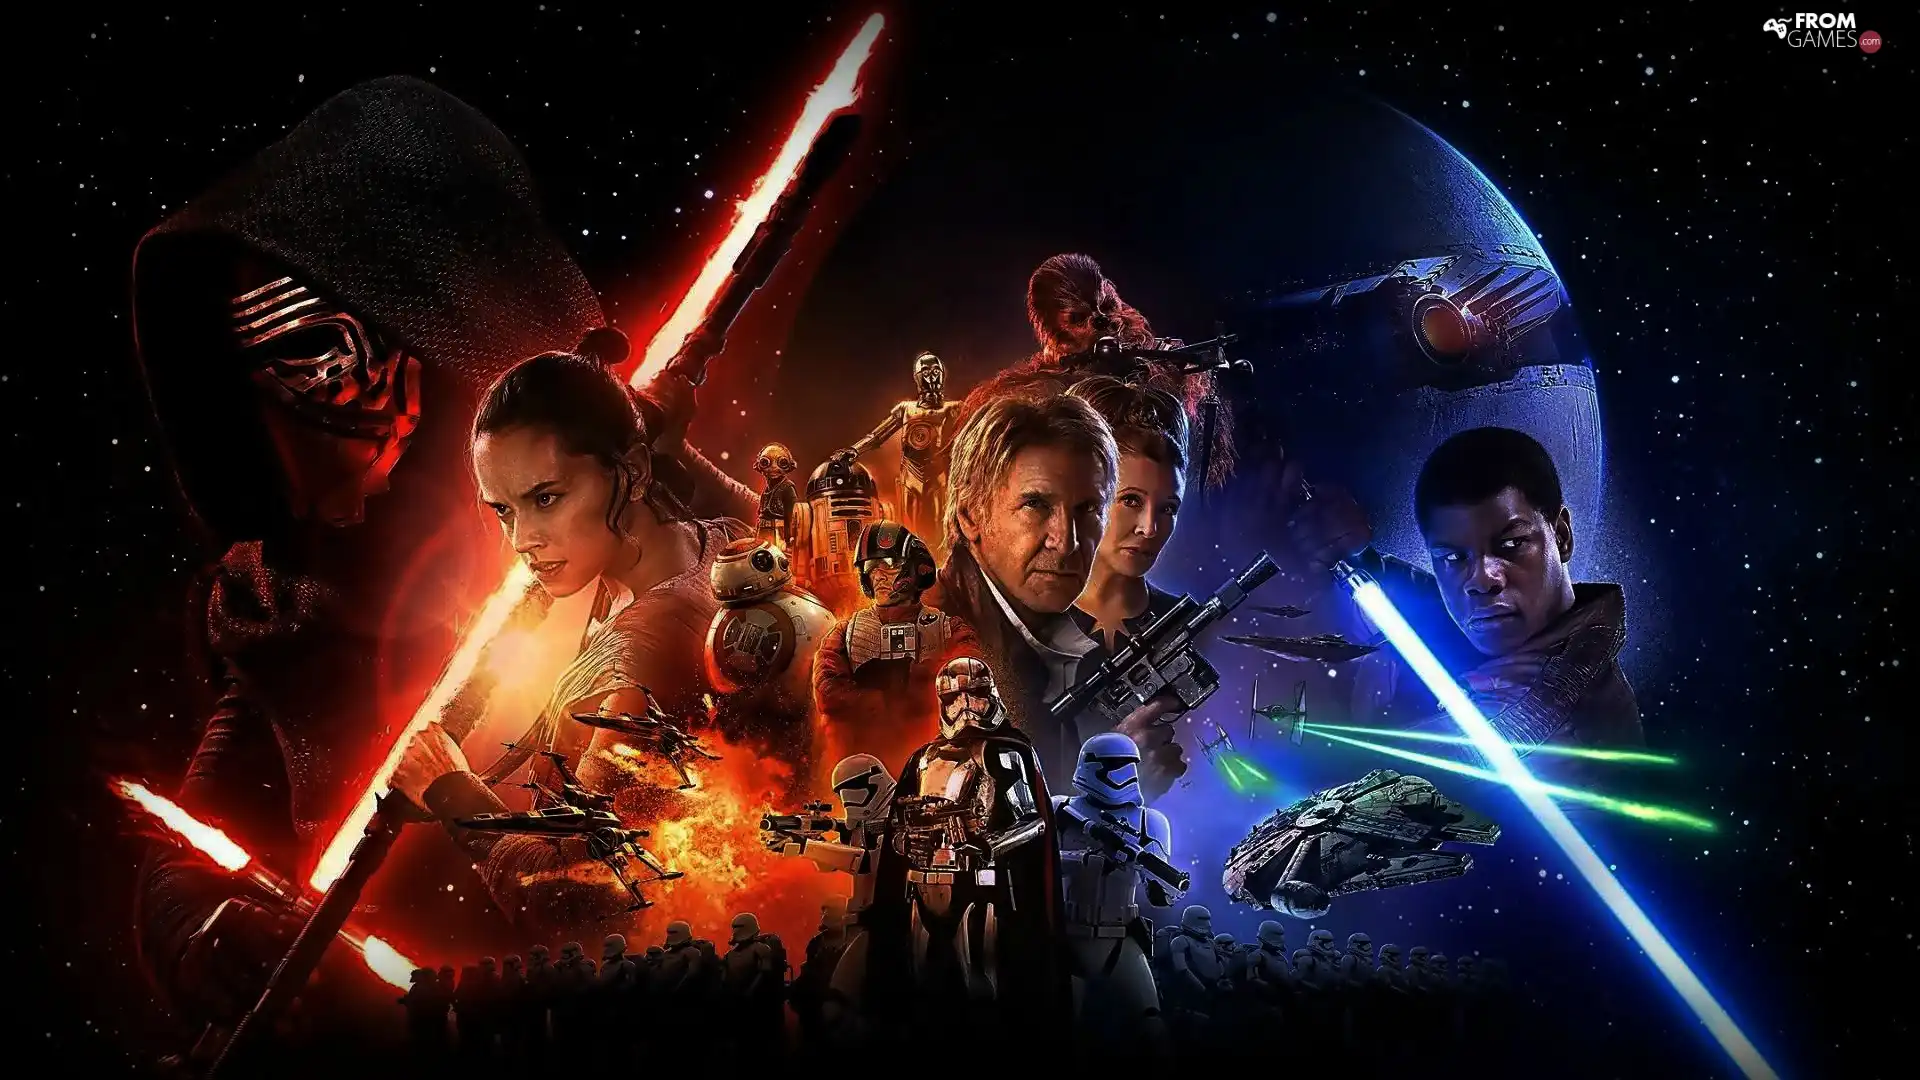 Characters, Star Wars: The Force Awakens, Star Wars: The Force Awakens